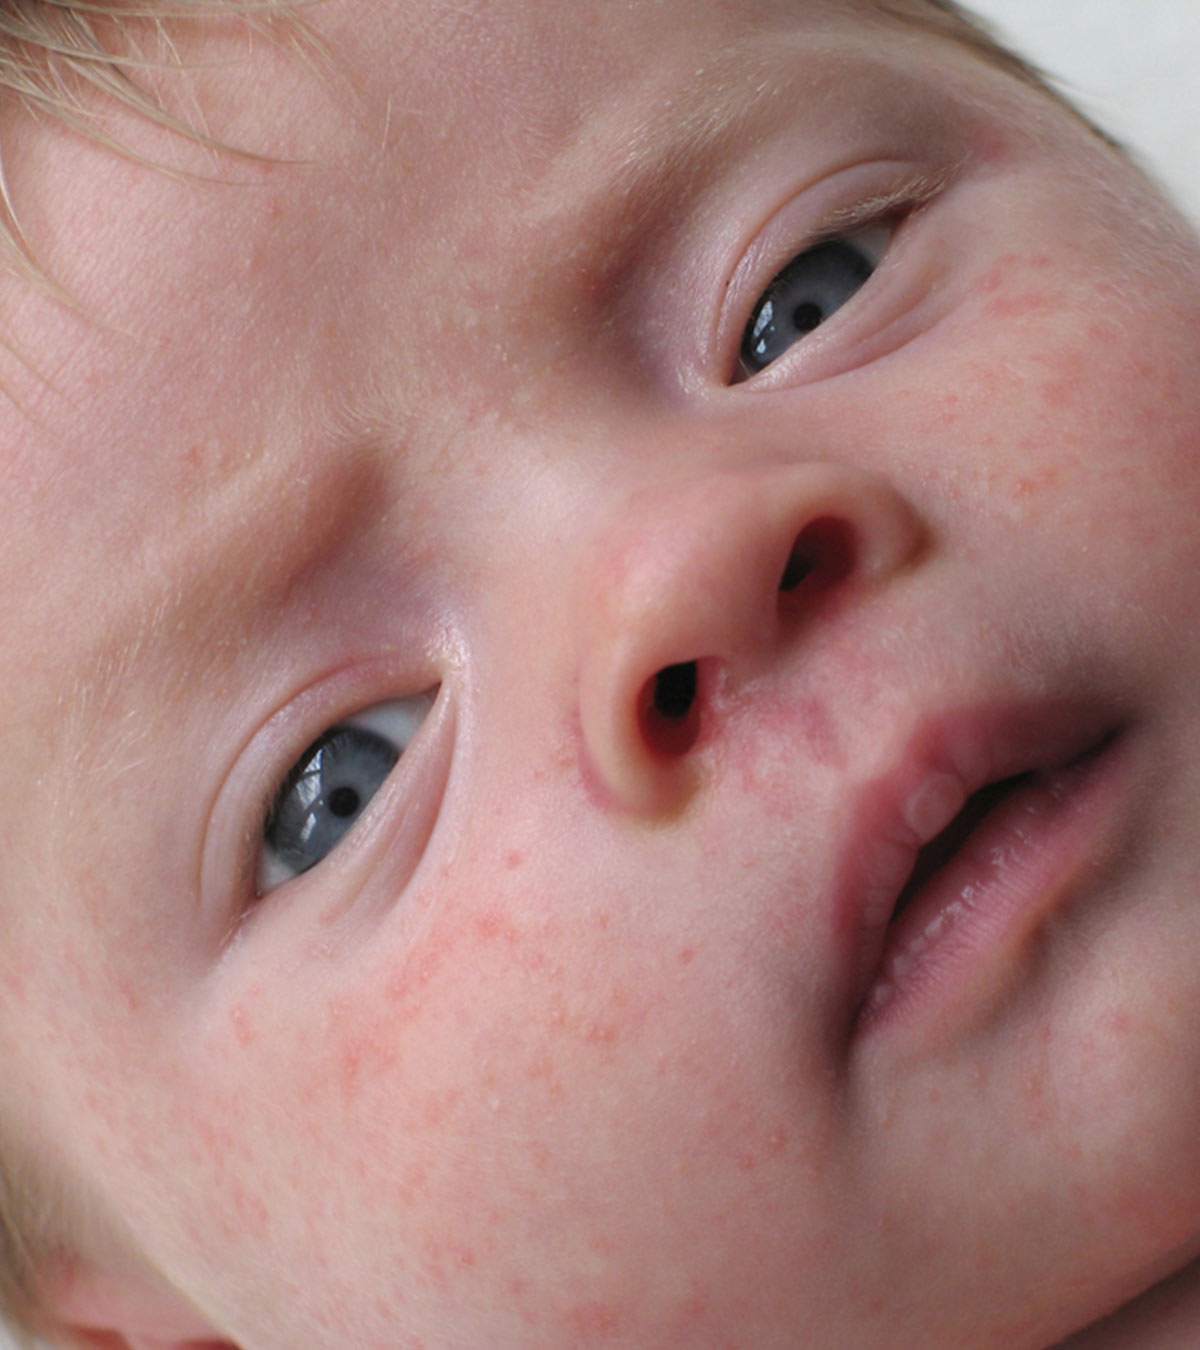 5 Types Of Skin Allergies In Babies, Treatment & Prevention